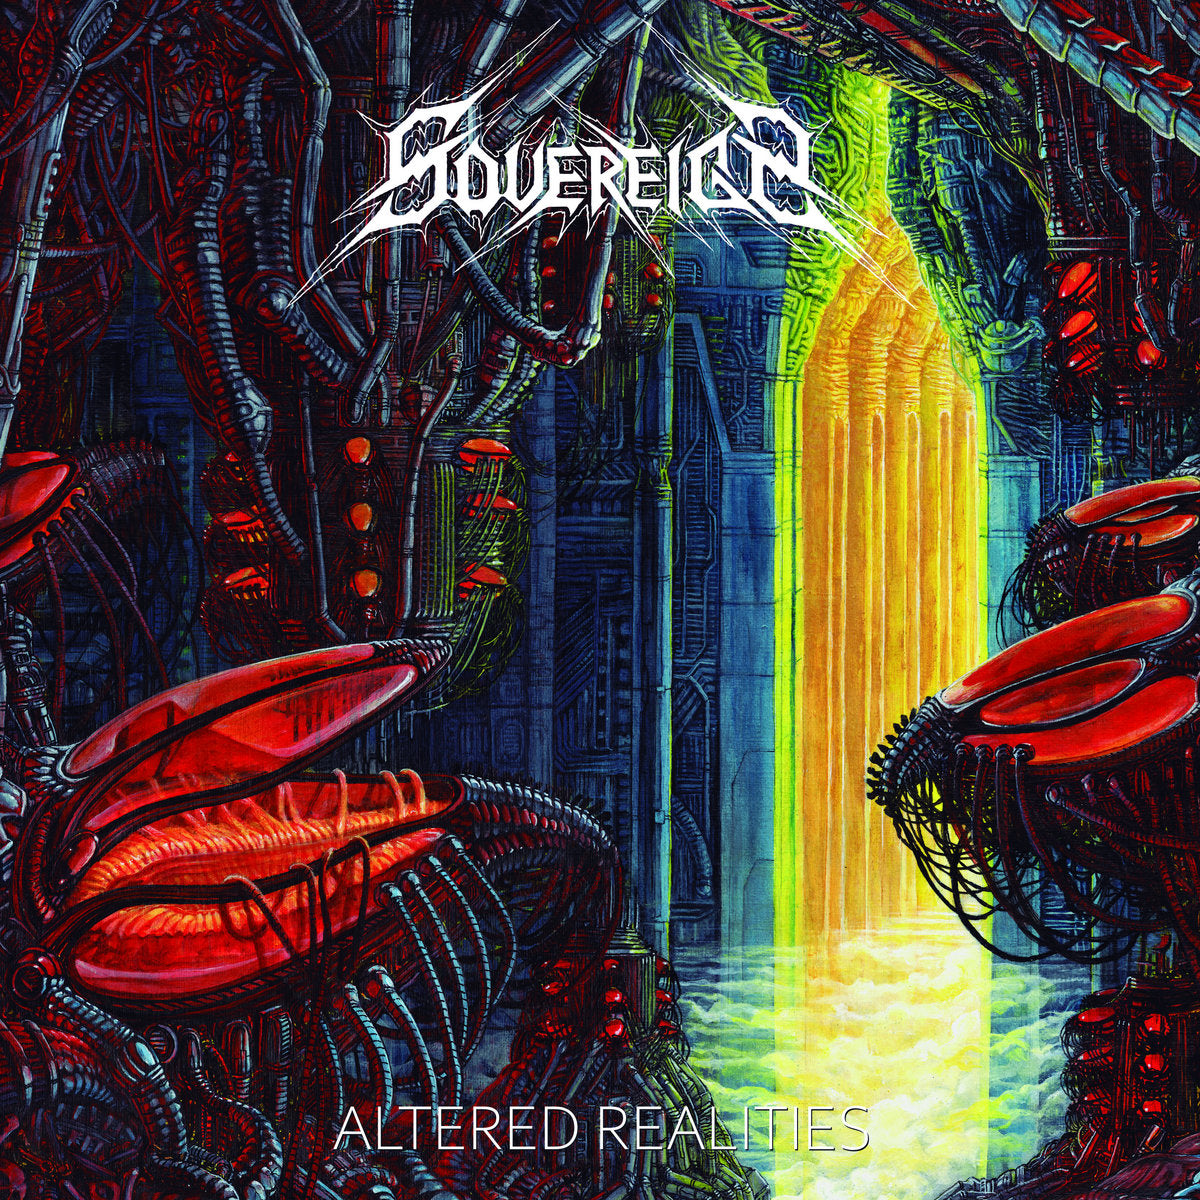 Sovereign - Altered Realities